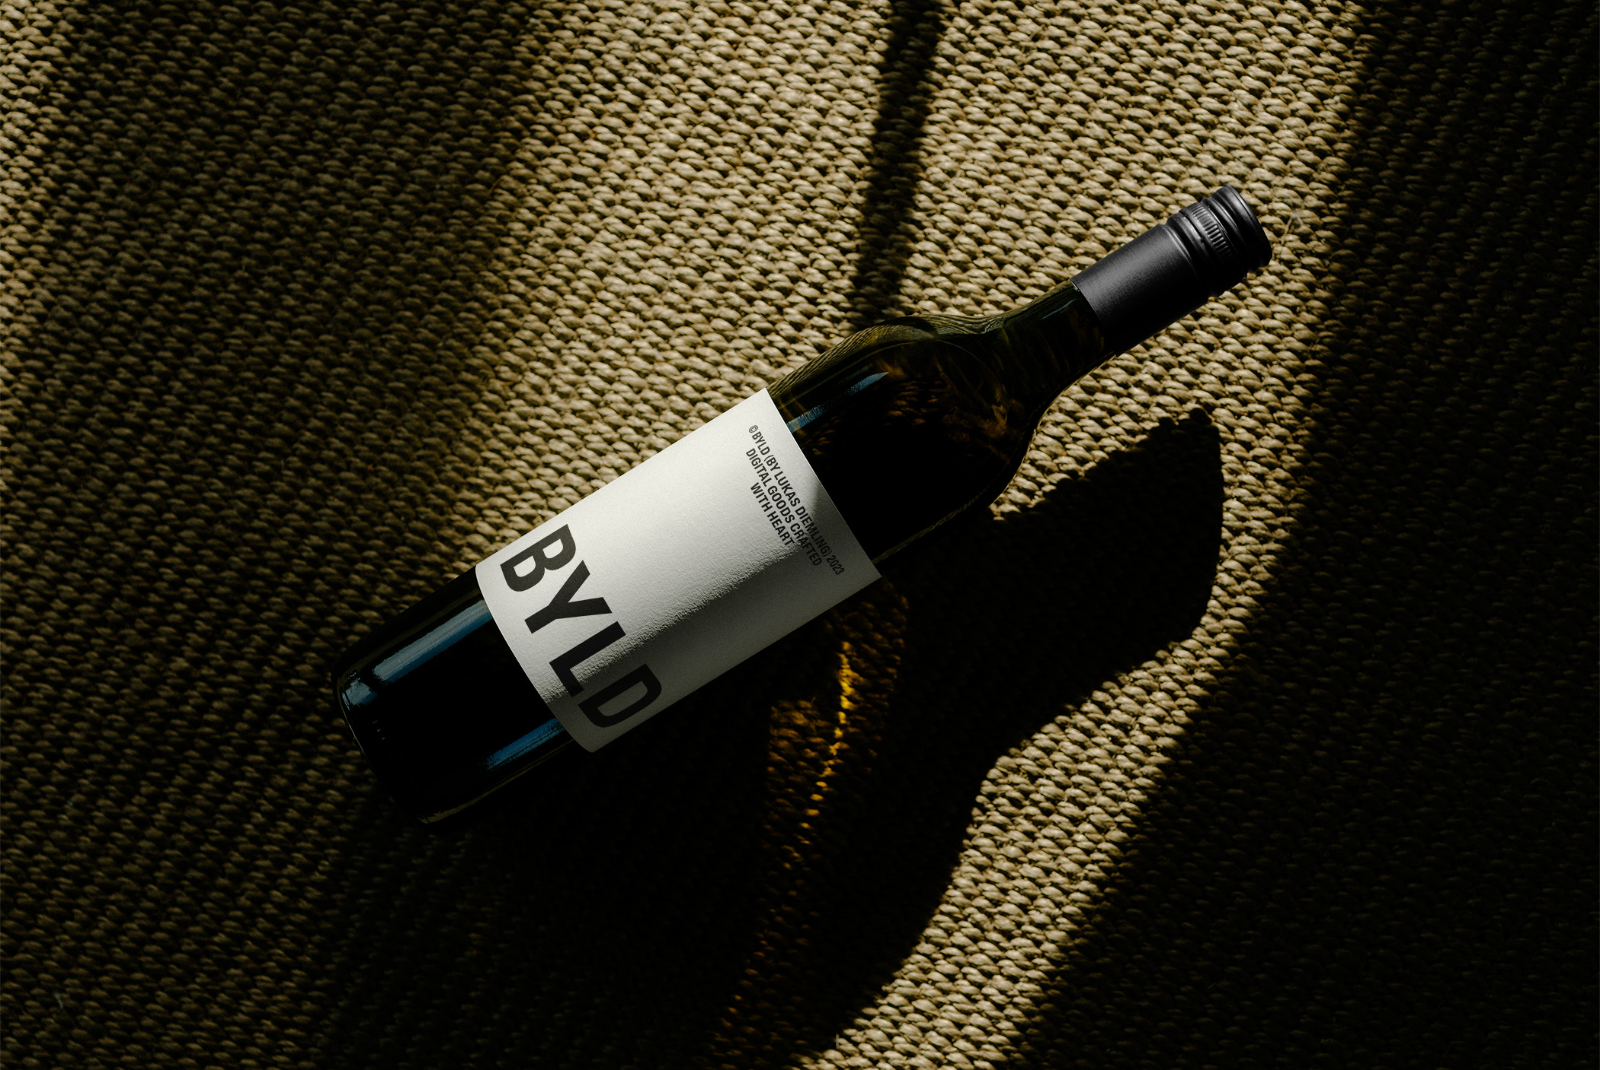 Elegant wine bottle mockup lying on textured fabric, with dramatic lighting and shadow play, ideal for showcasing label designs.